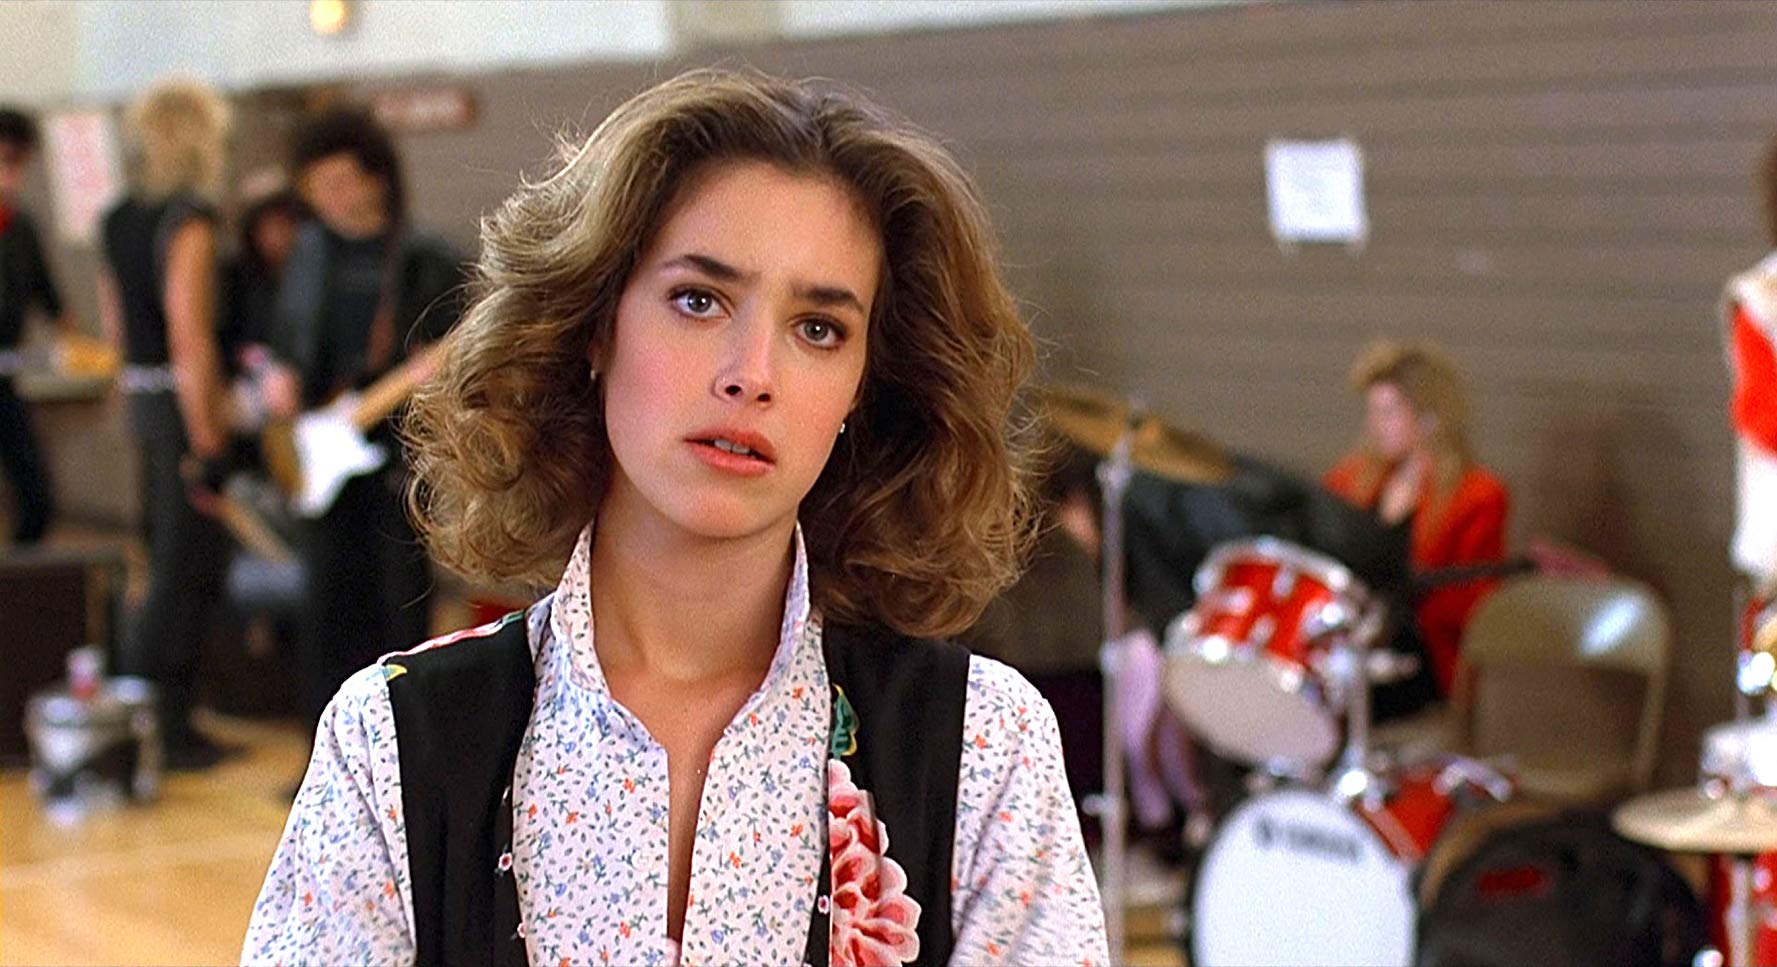 Back To The Future's Claudia Wells talks with TVStoreOnline.com - TVStoreOnline